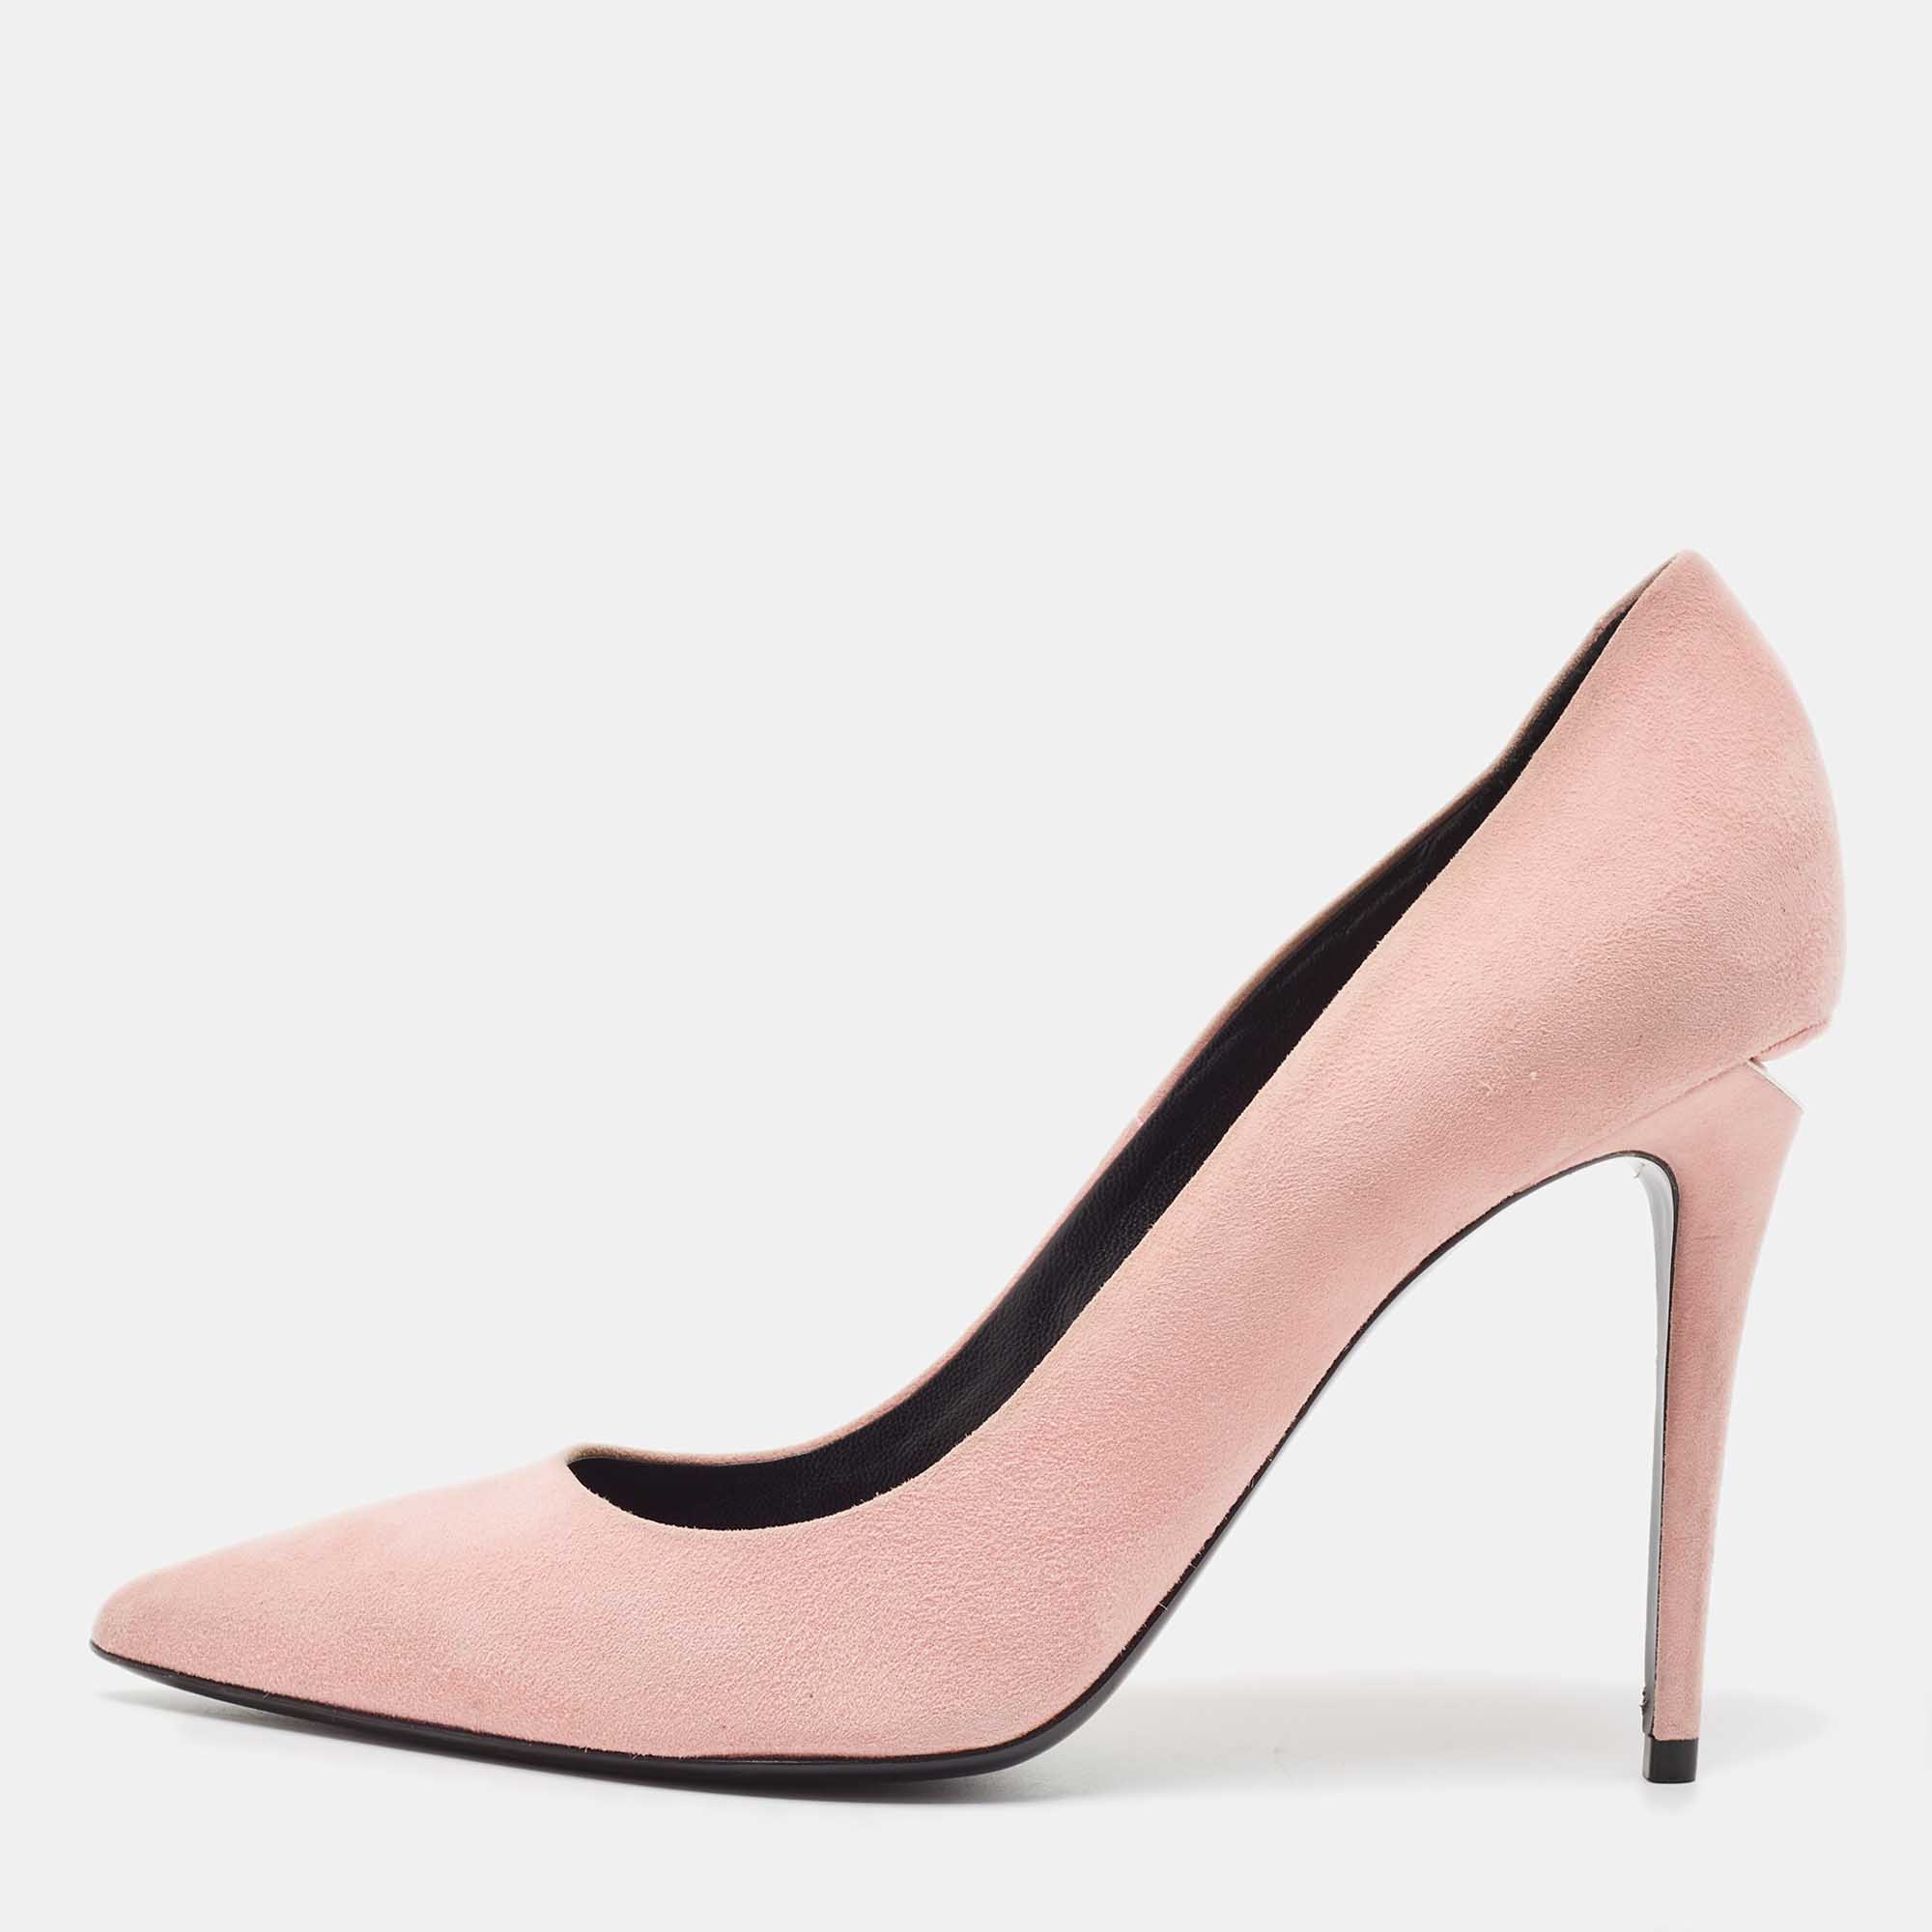 Alexander wang pink suede pointed toe pumps size 40